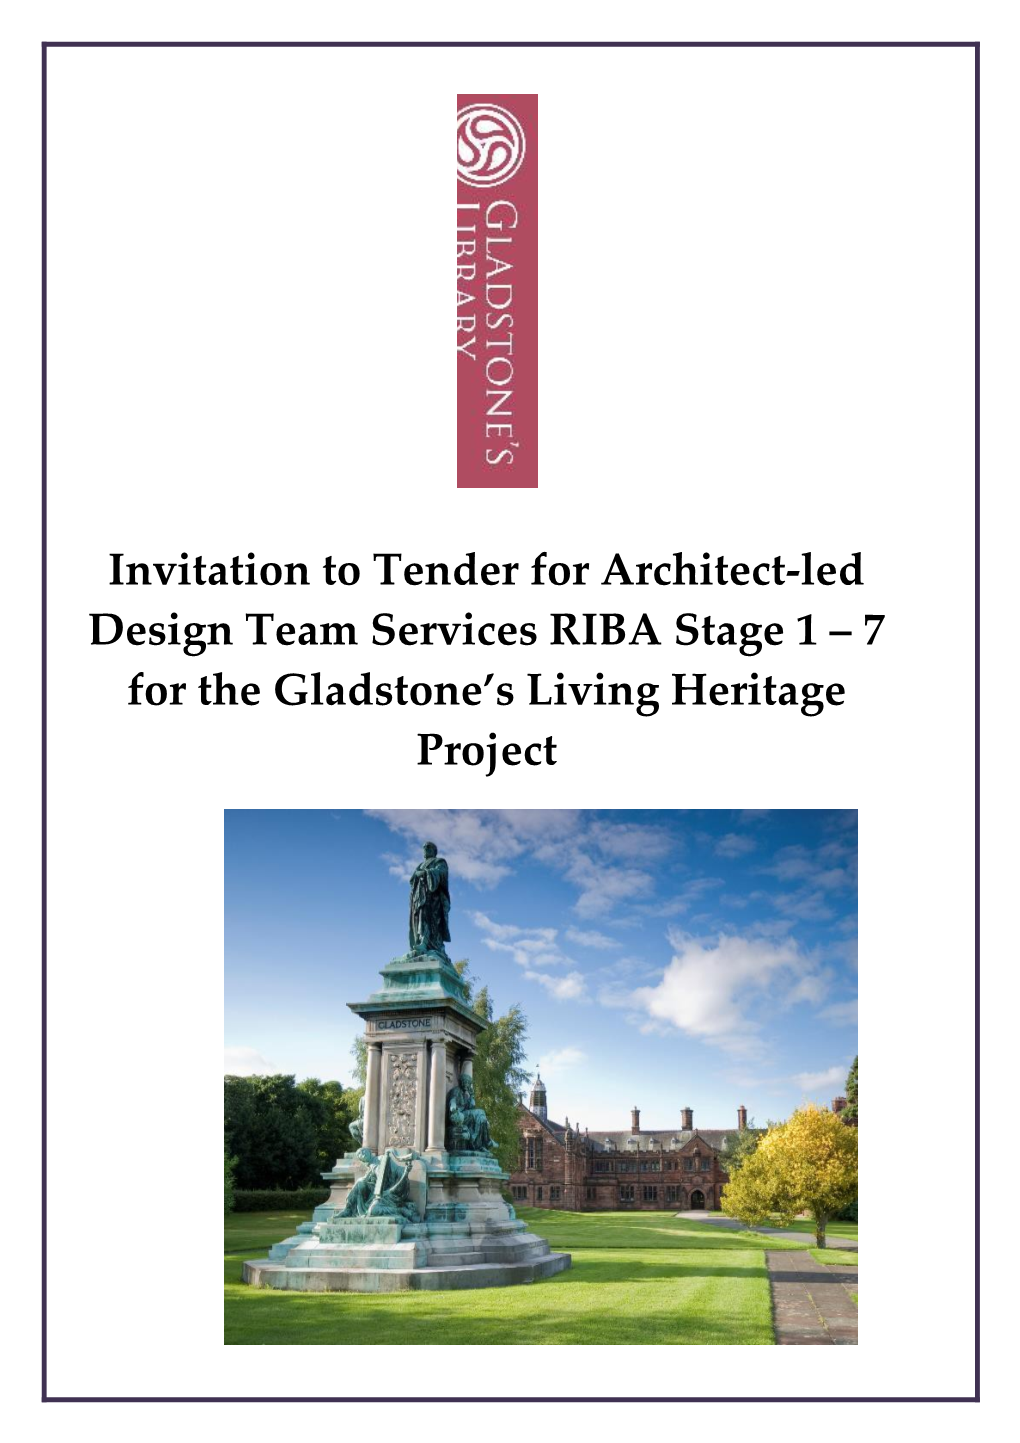 Invitation to Tender for Architect-Led Design Team Services RIBA Stage 1 7 for the Gladstone